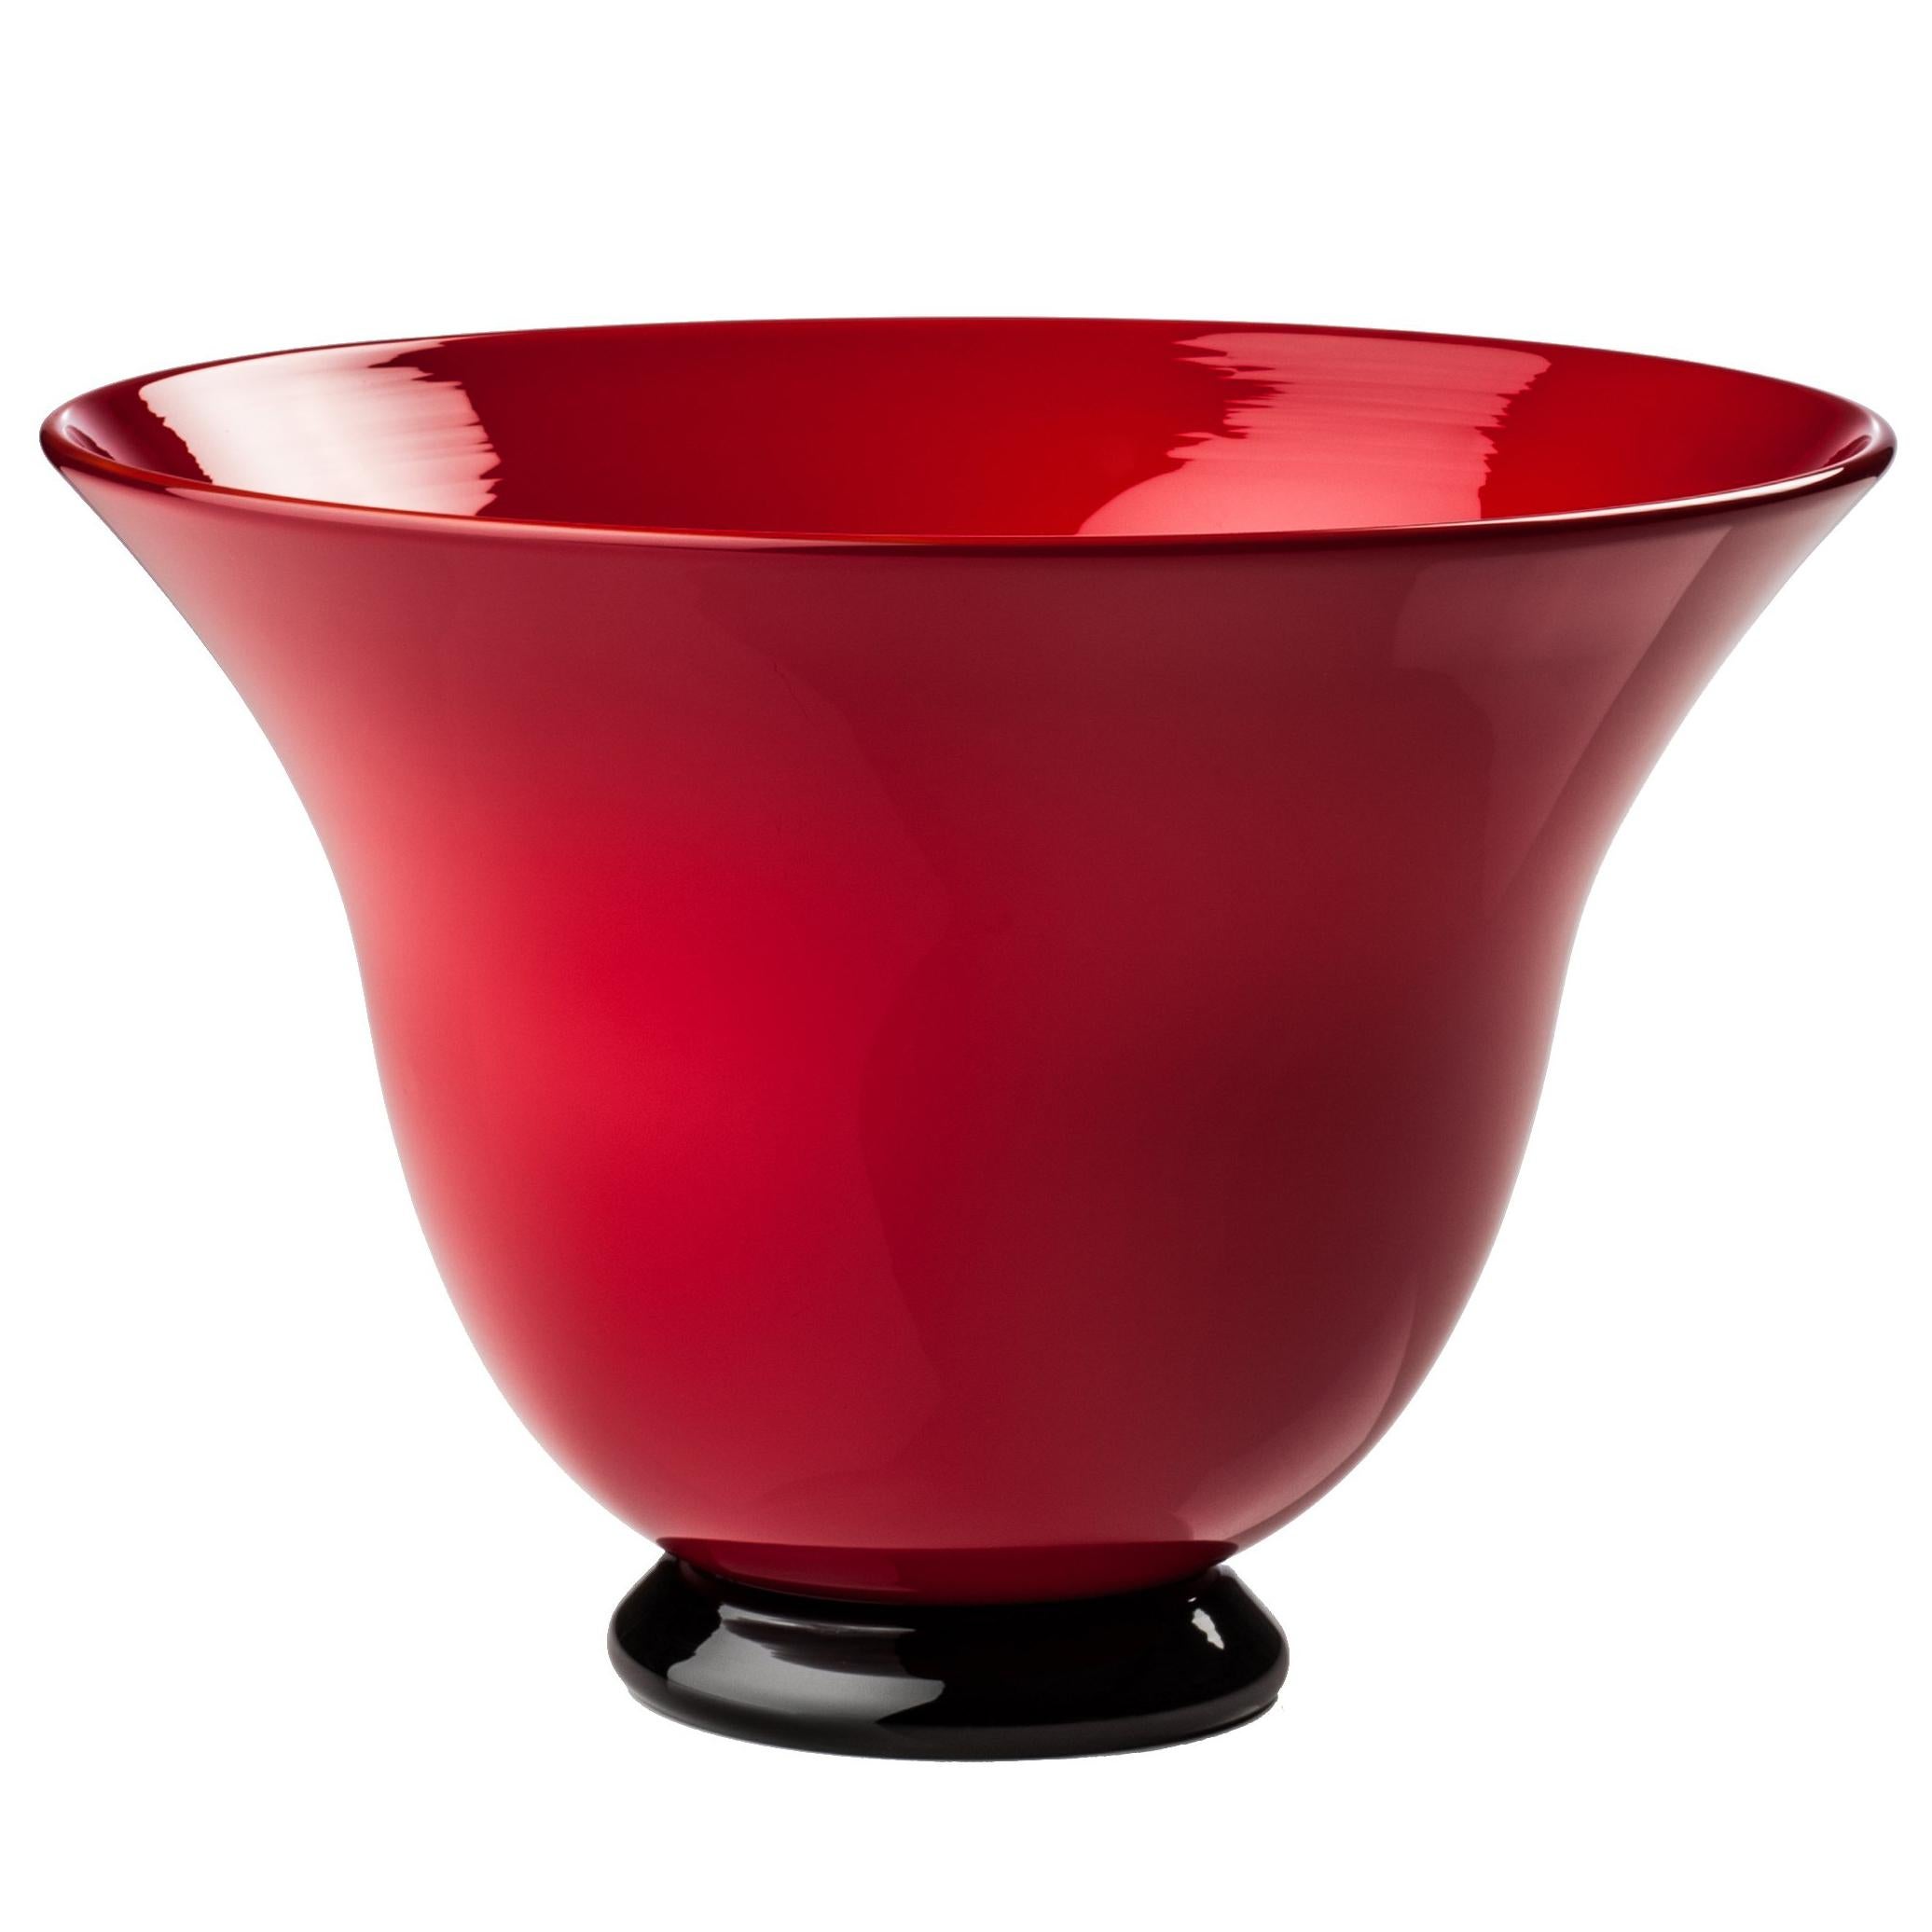 Anni Trenta Short Glass Bowl in Red by Venini For Sale